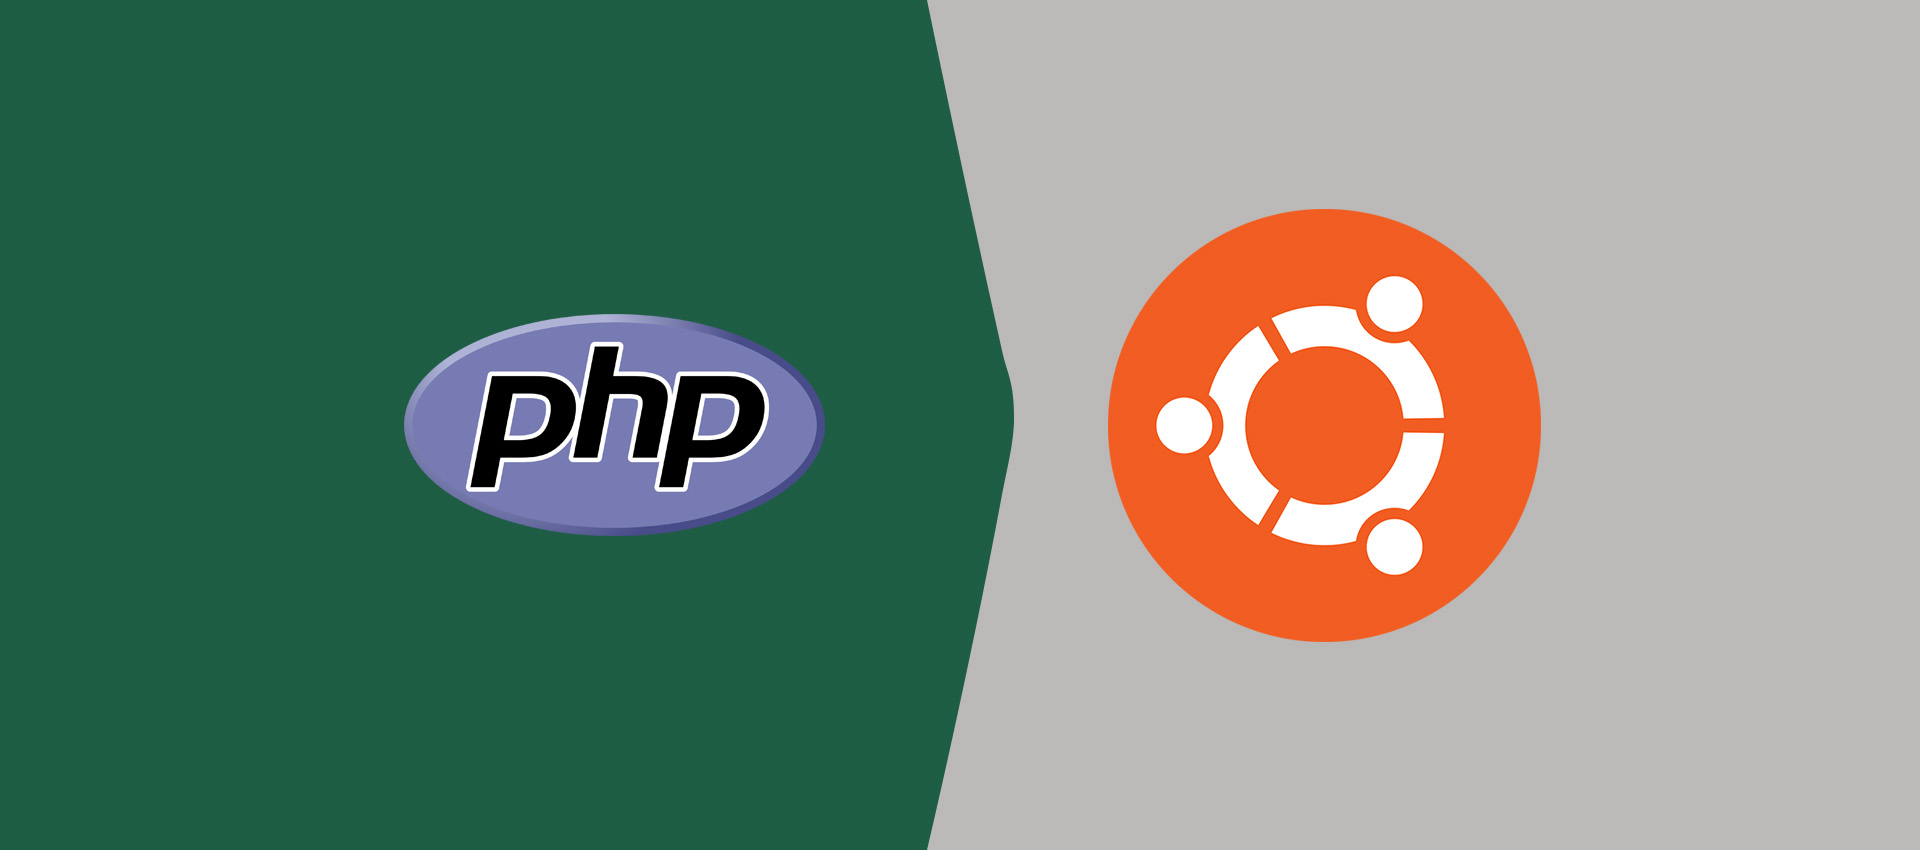 How To Switch PHP Version on Ubuntu 20.04 LTS